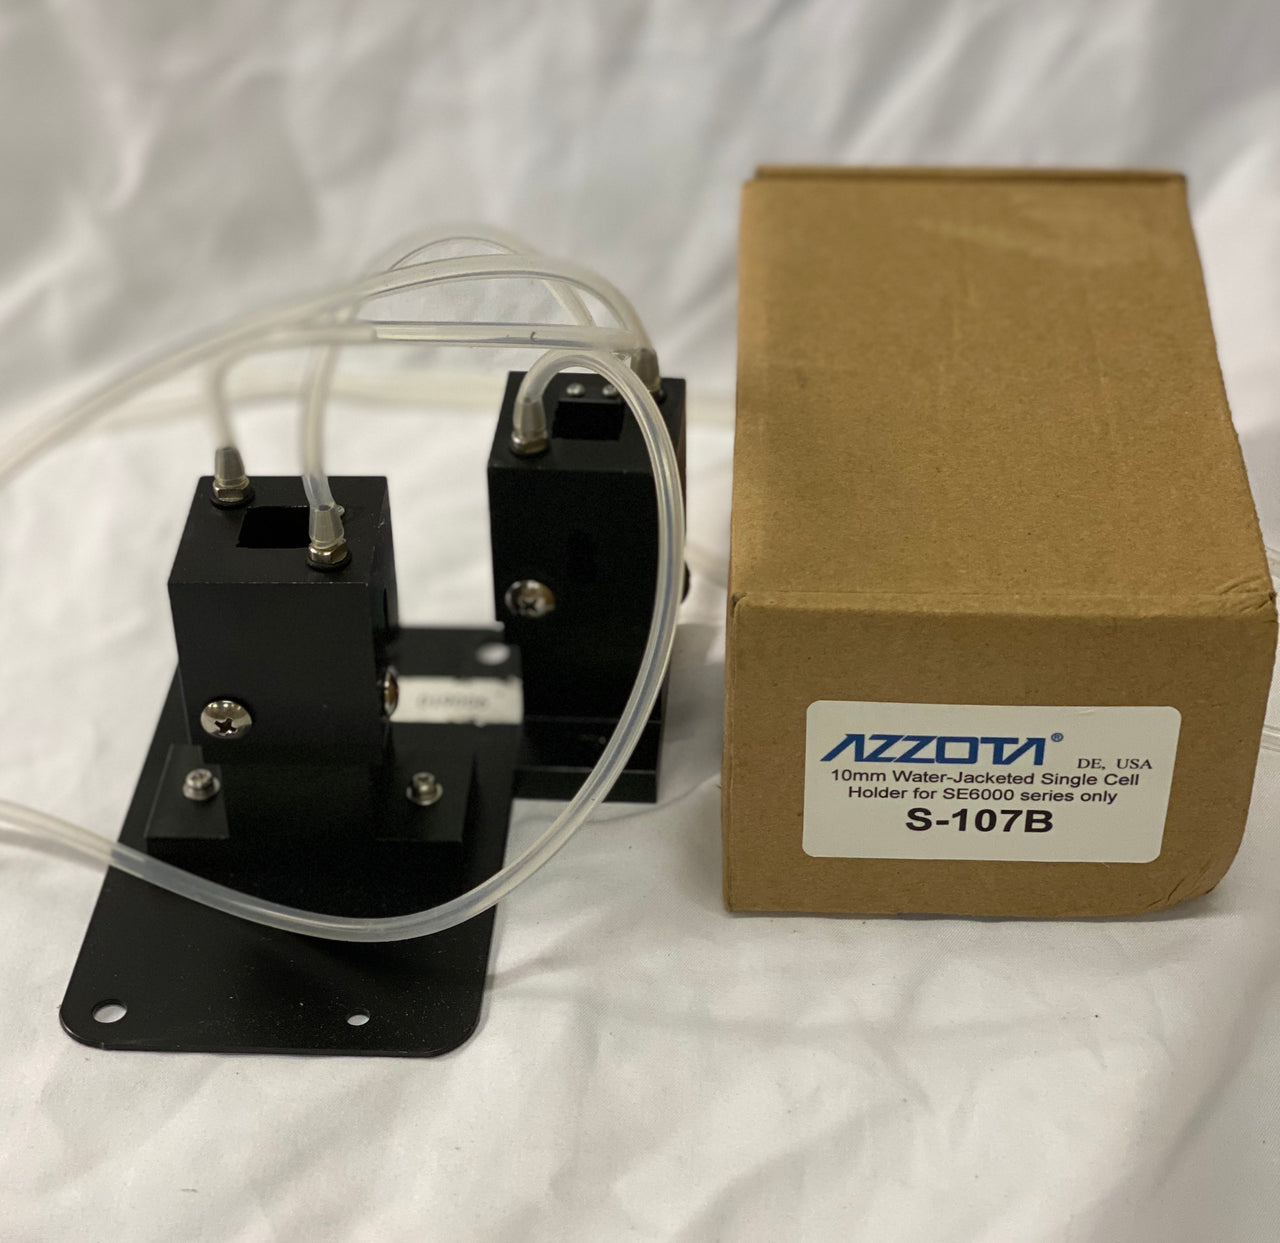 Azzota® Water-Jacketed Single Cell Holder for Double Beam Spectrophotometer, 10mm